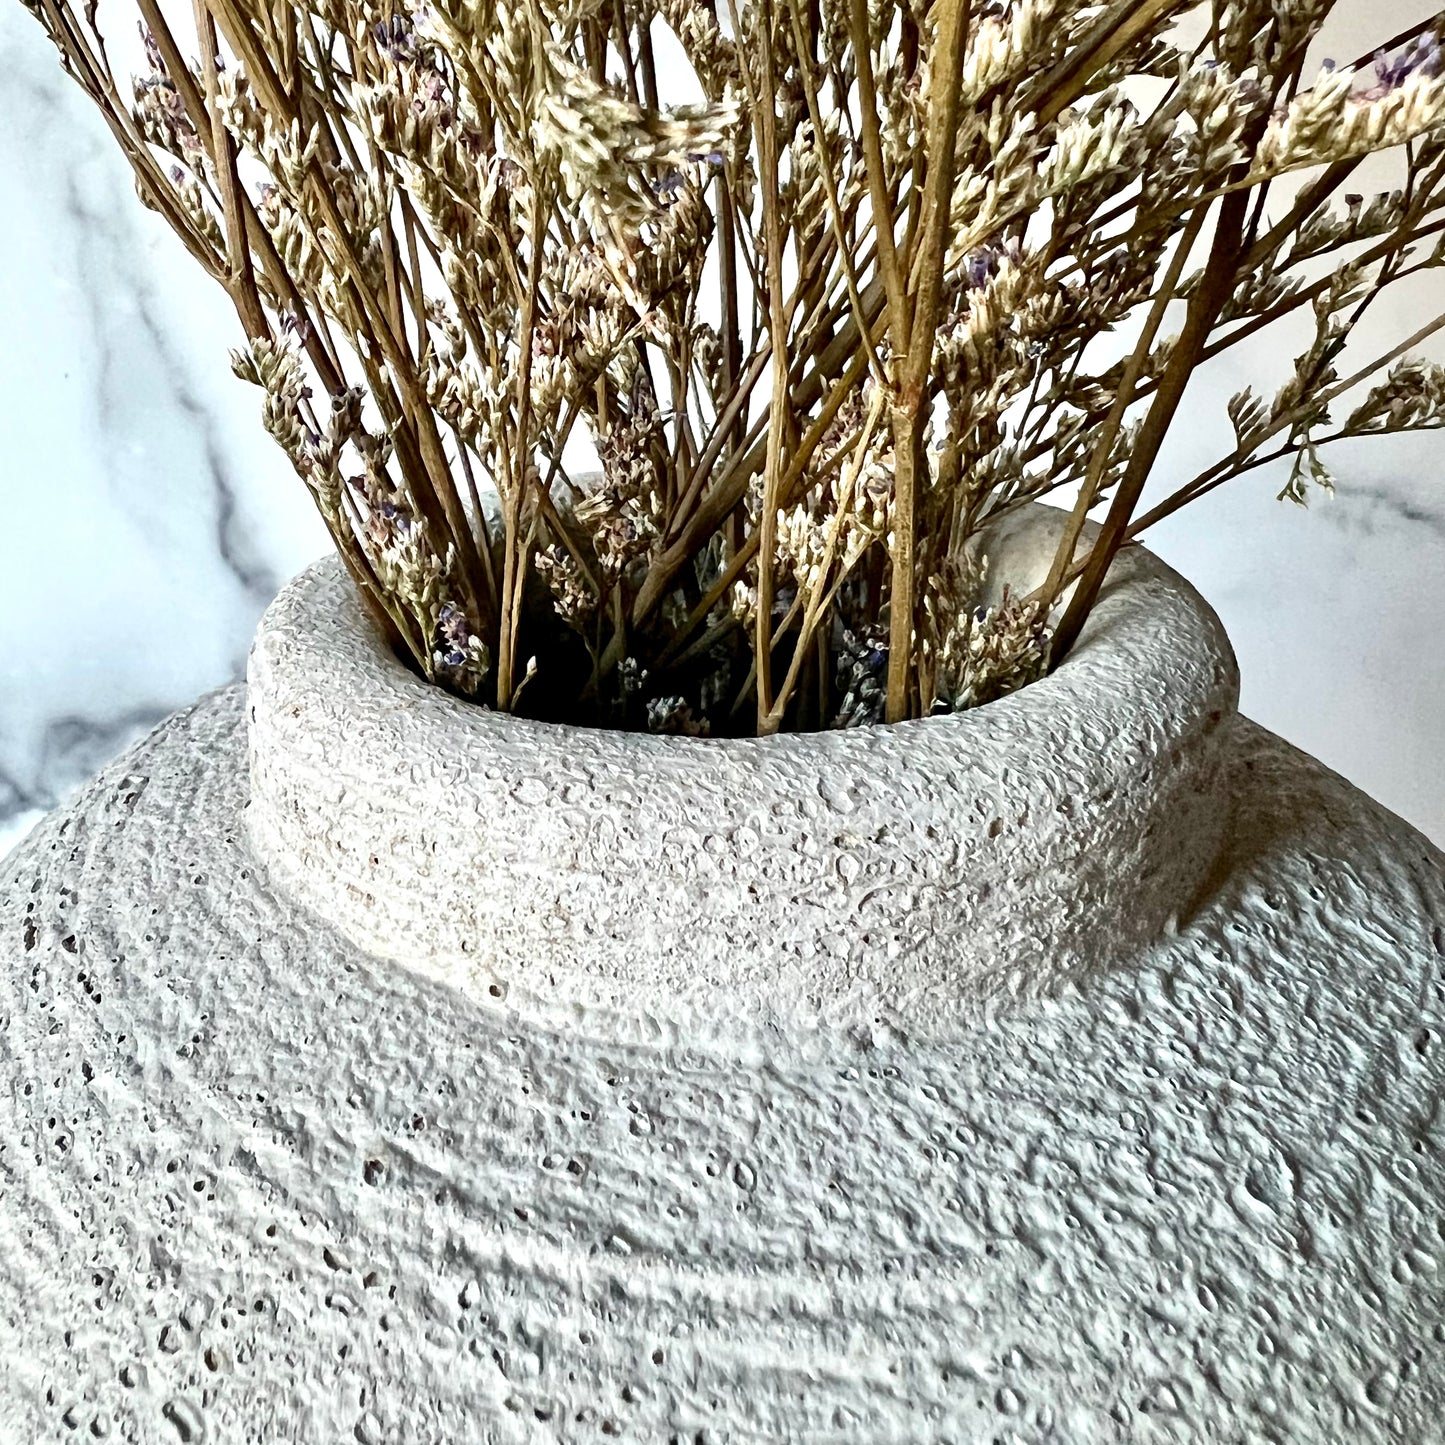 The above-angle view of a the opening of a gray vase filled with dried flowers